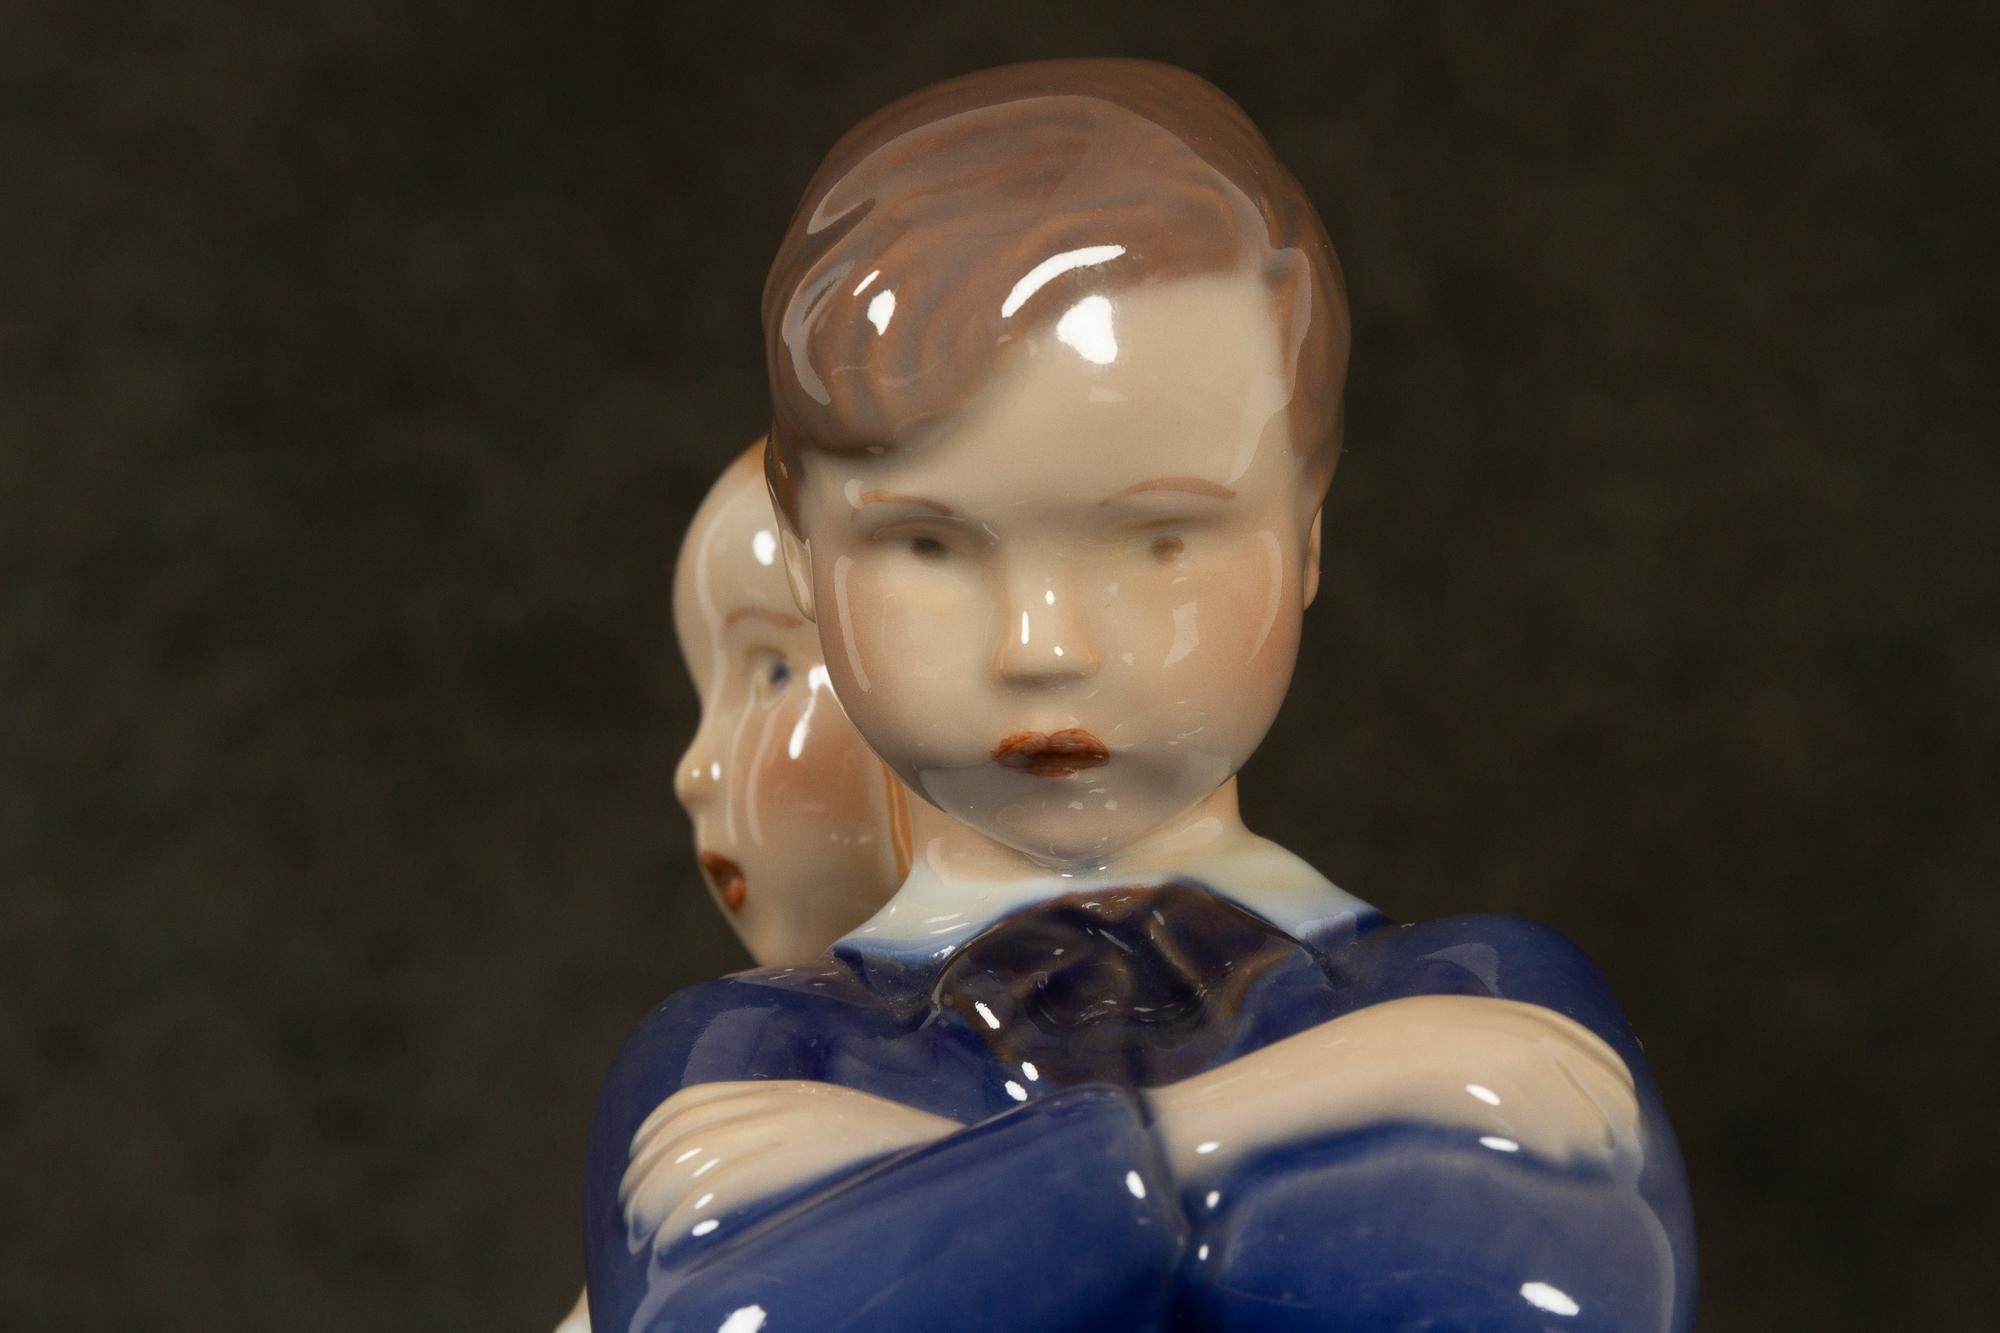 Vintage Danish Porcelain Figurine by Claire Weiss for Bing & Grøndahl, 1970s For Sale 3